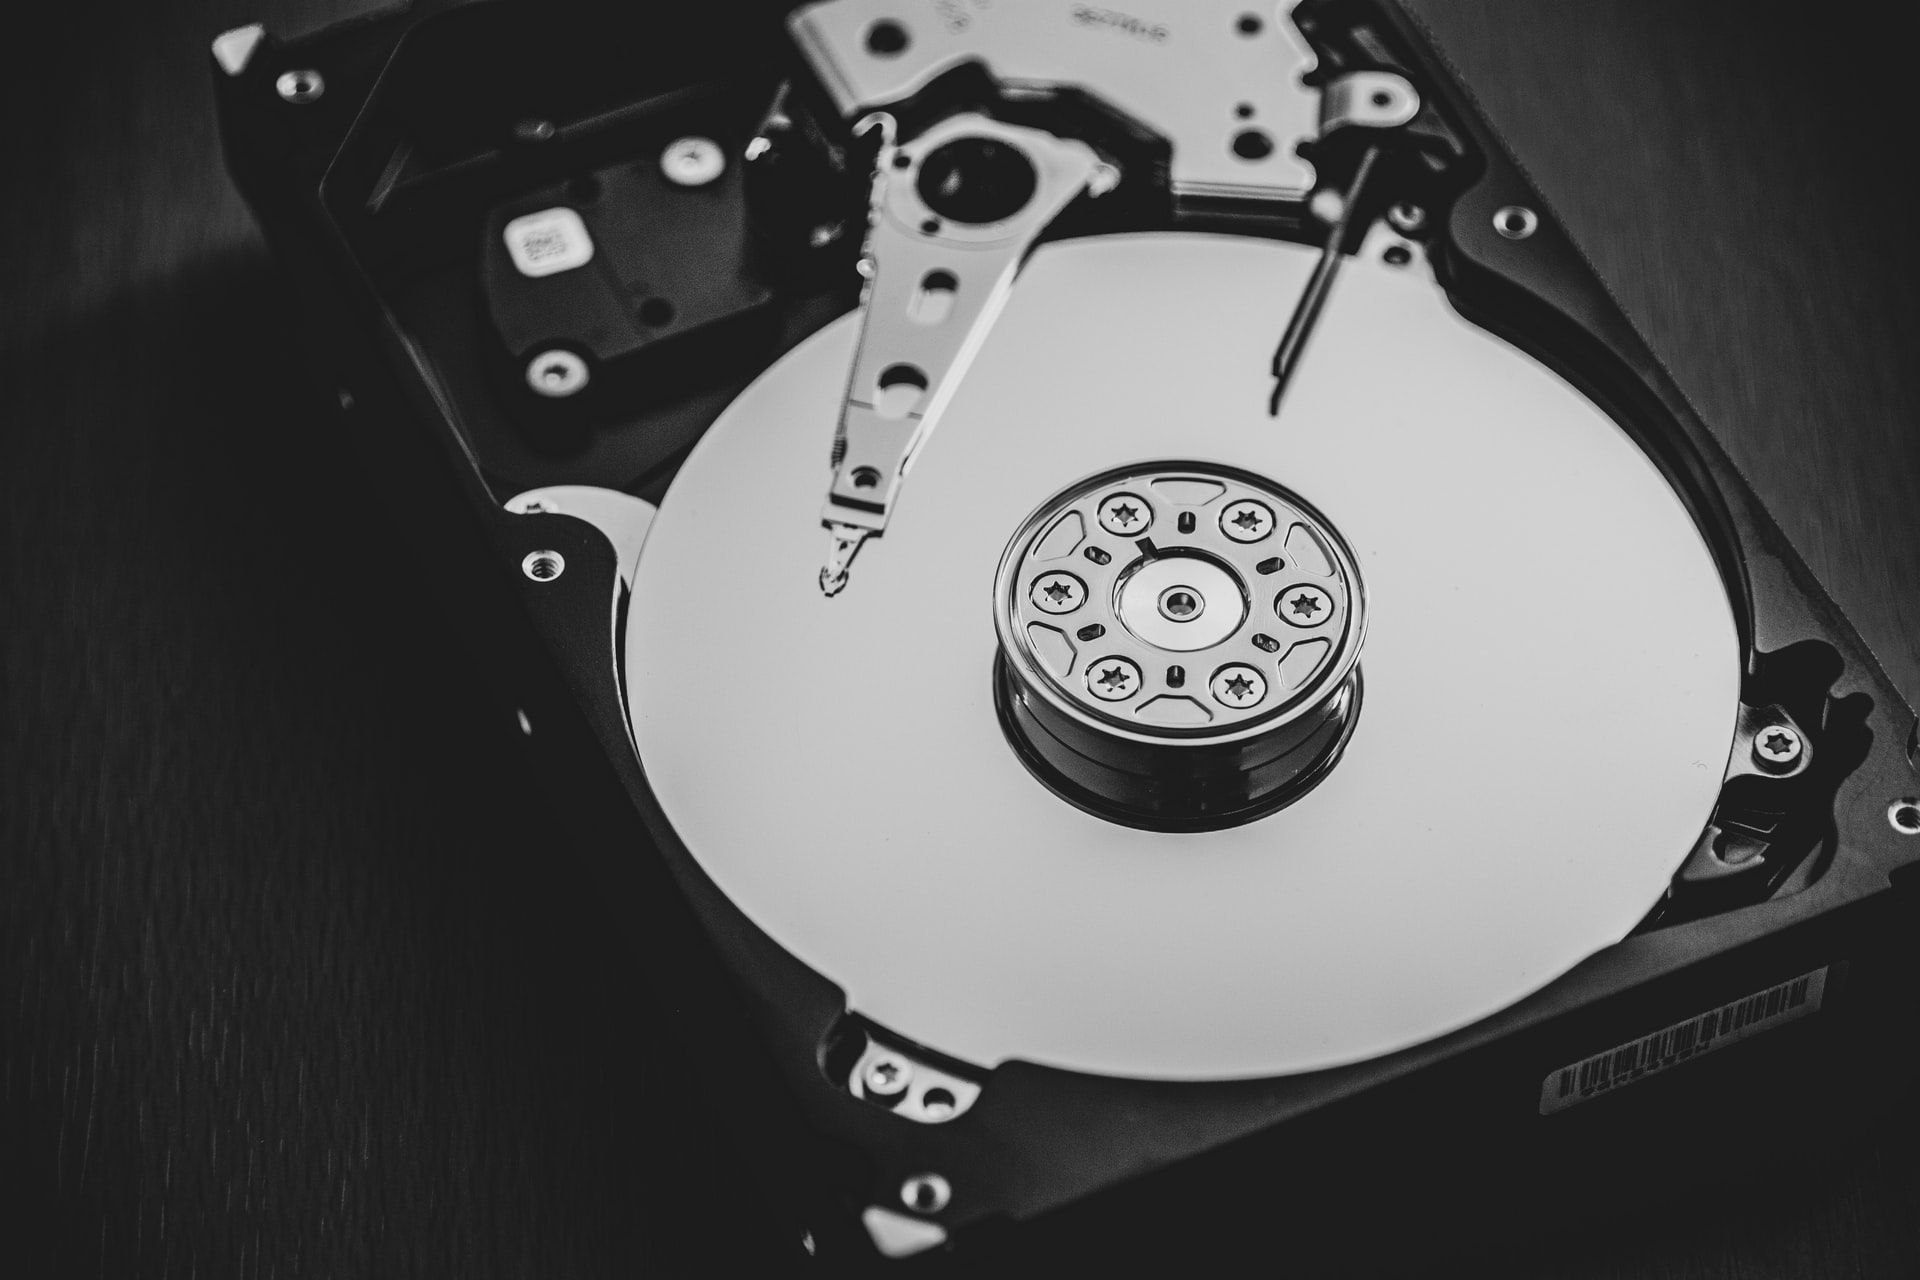 HDD Hard Disk Drive Definition